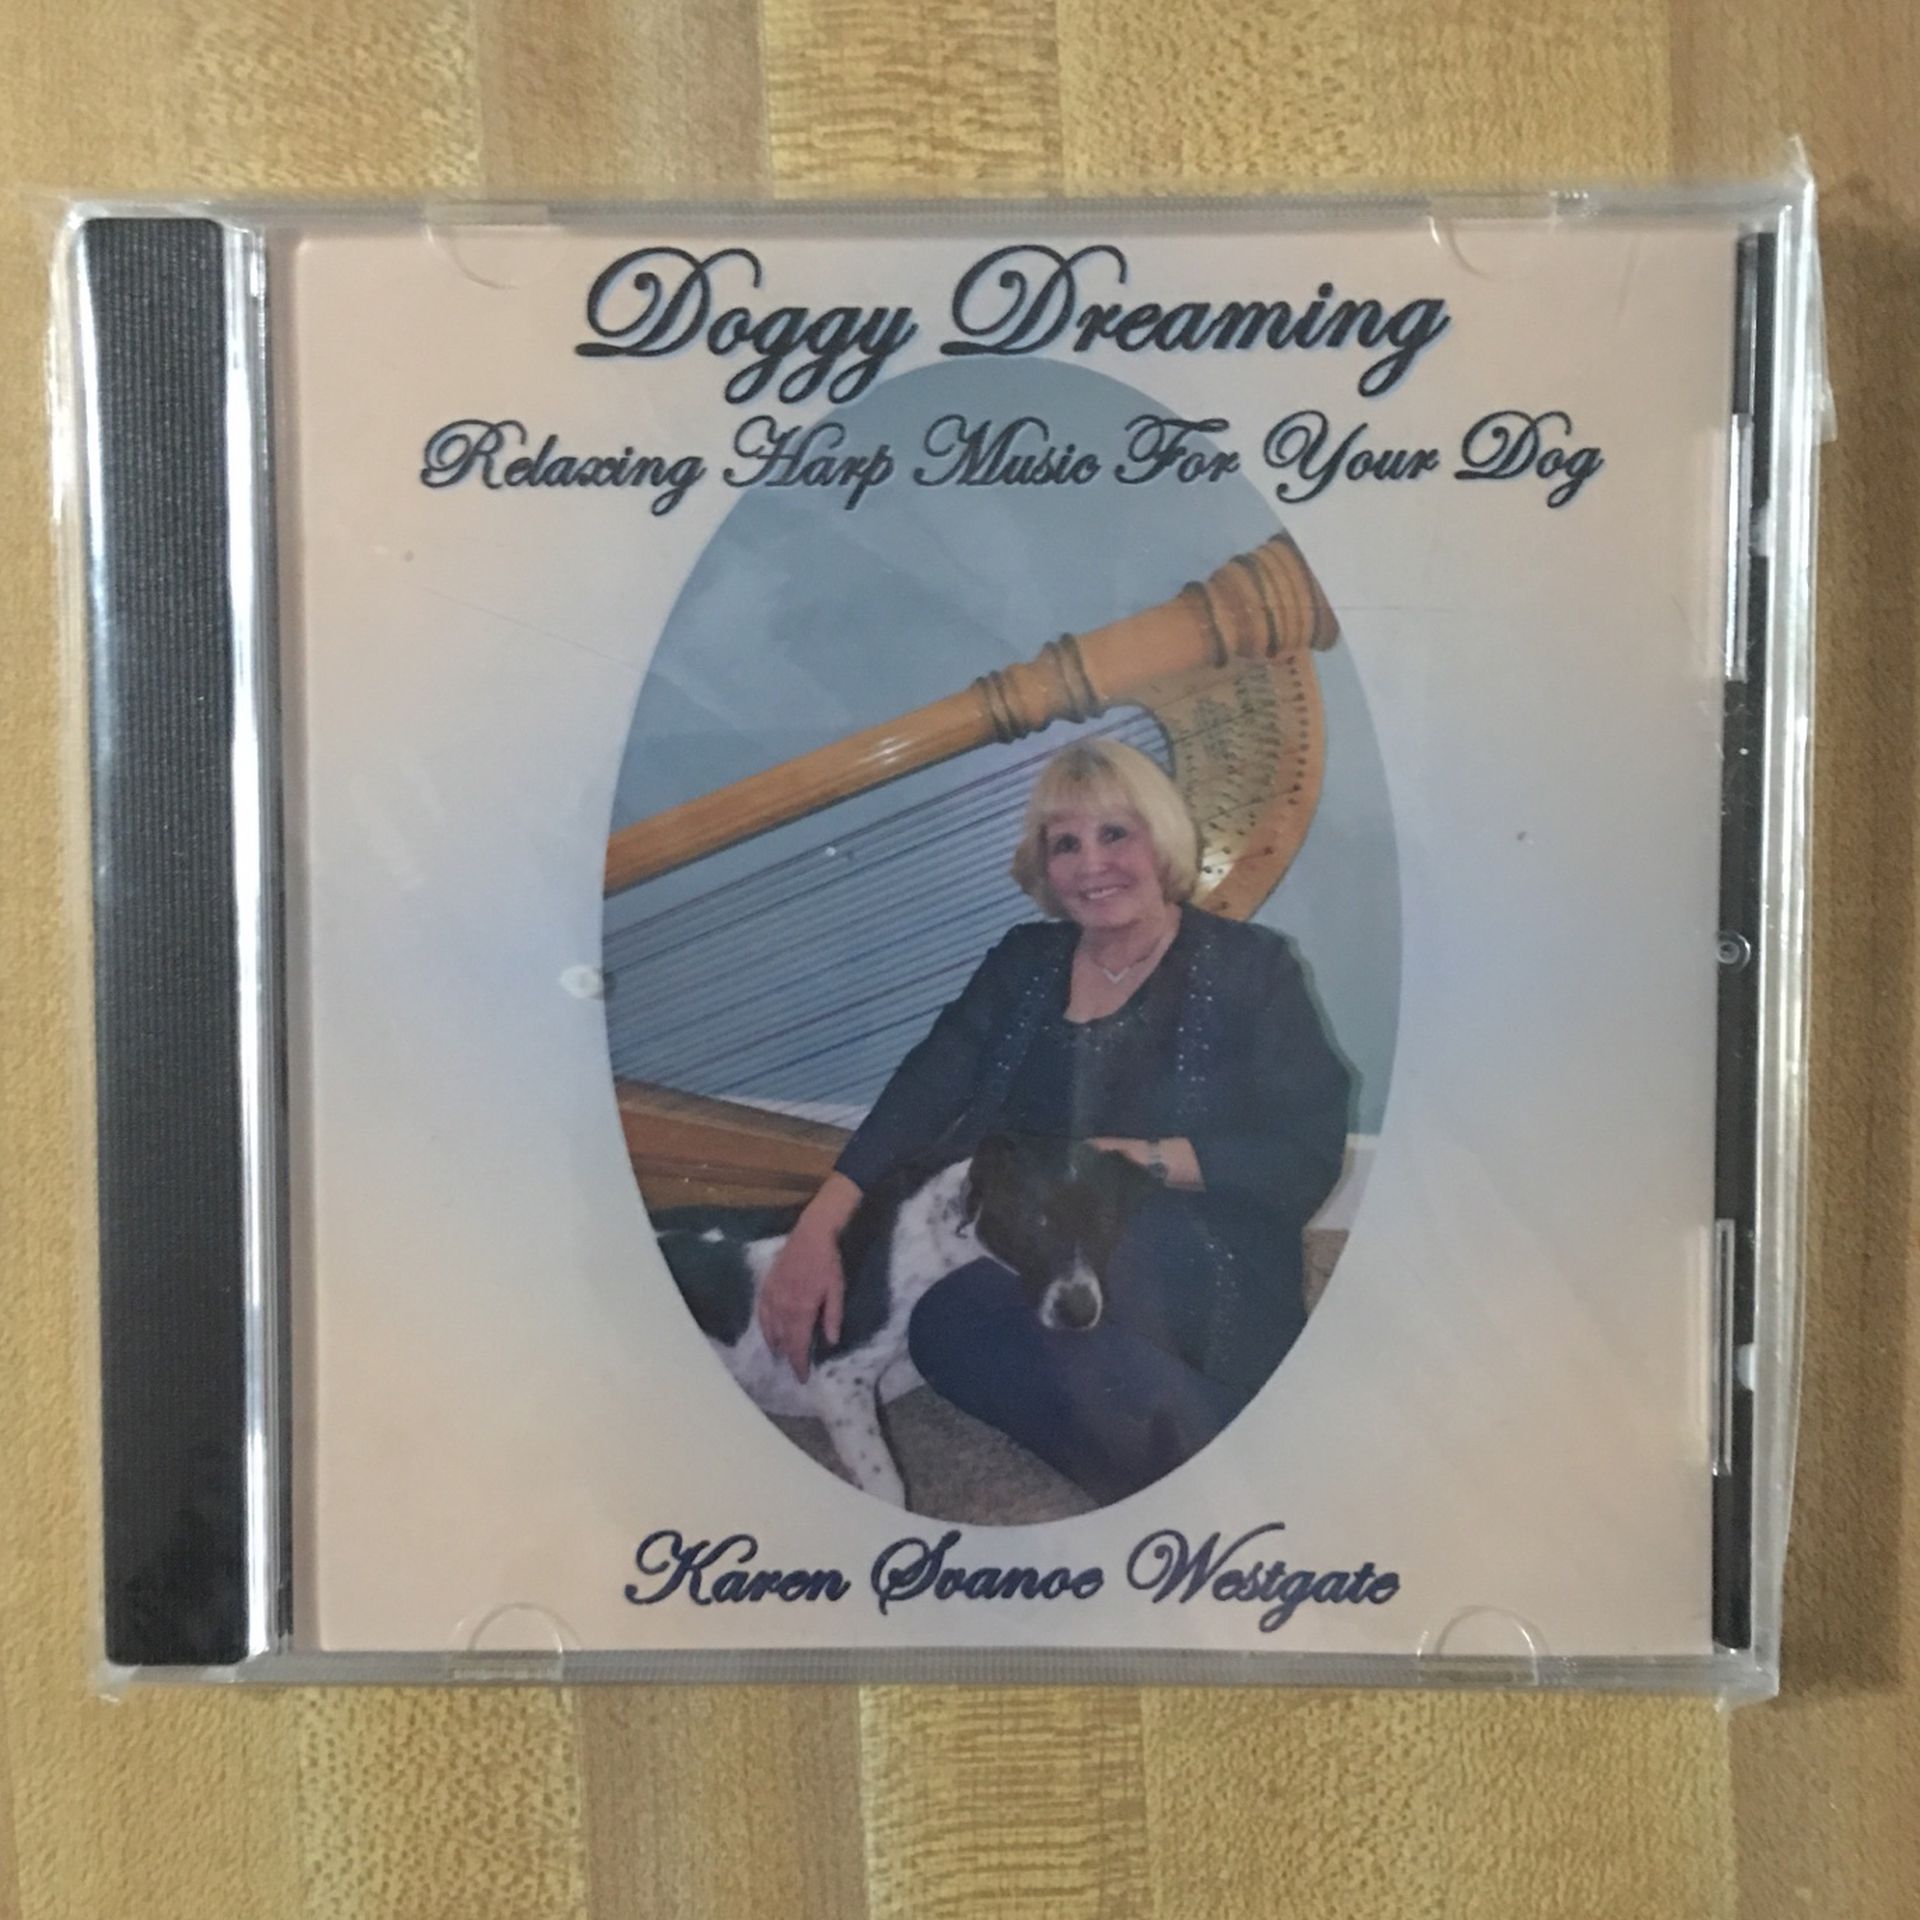 Doggy Dreaming Cd Sealed Vintage